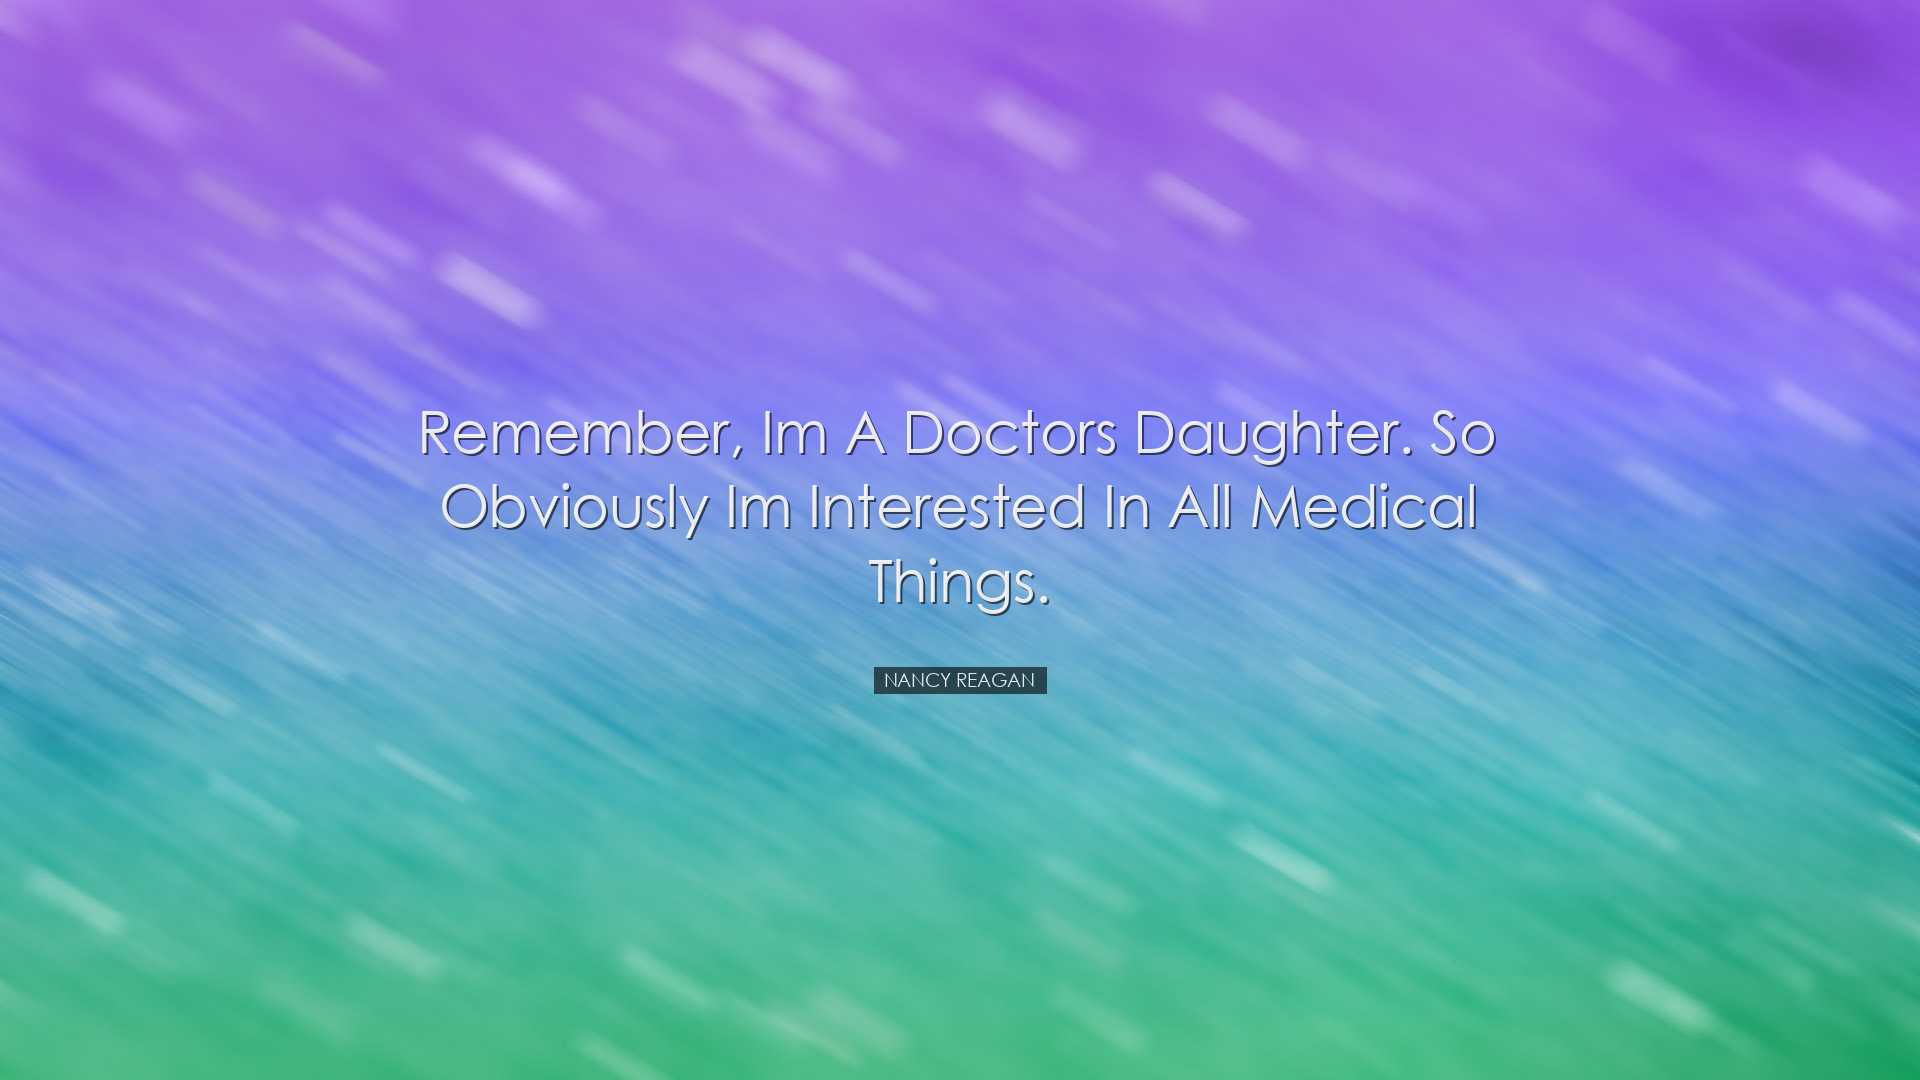 Remember, Im a doctors daughter. So obviously Im interested in all